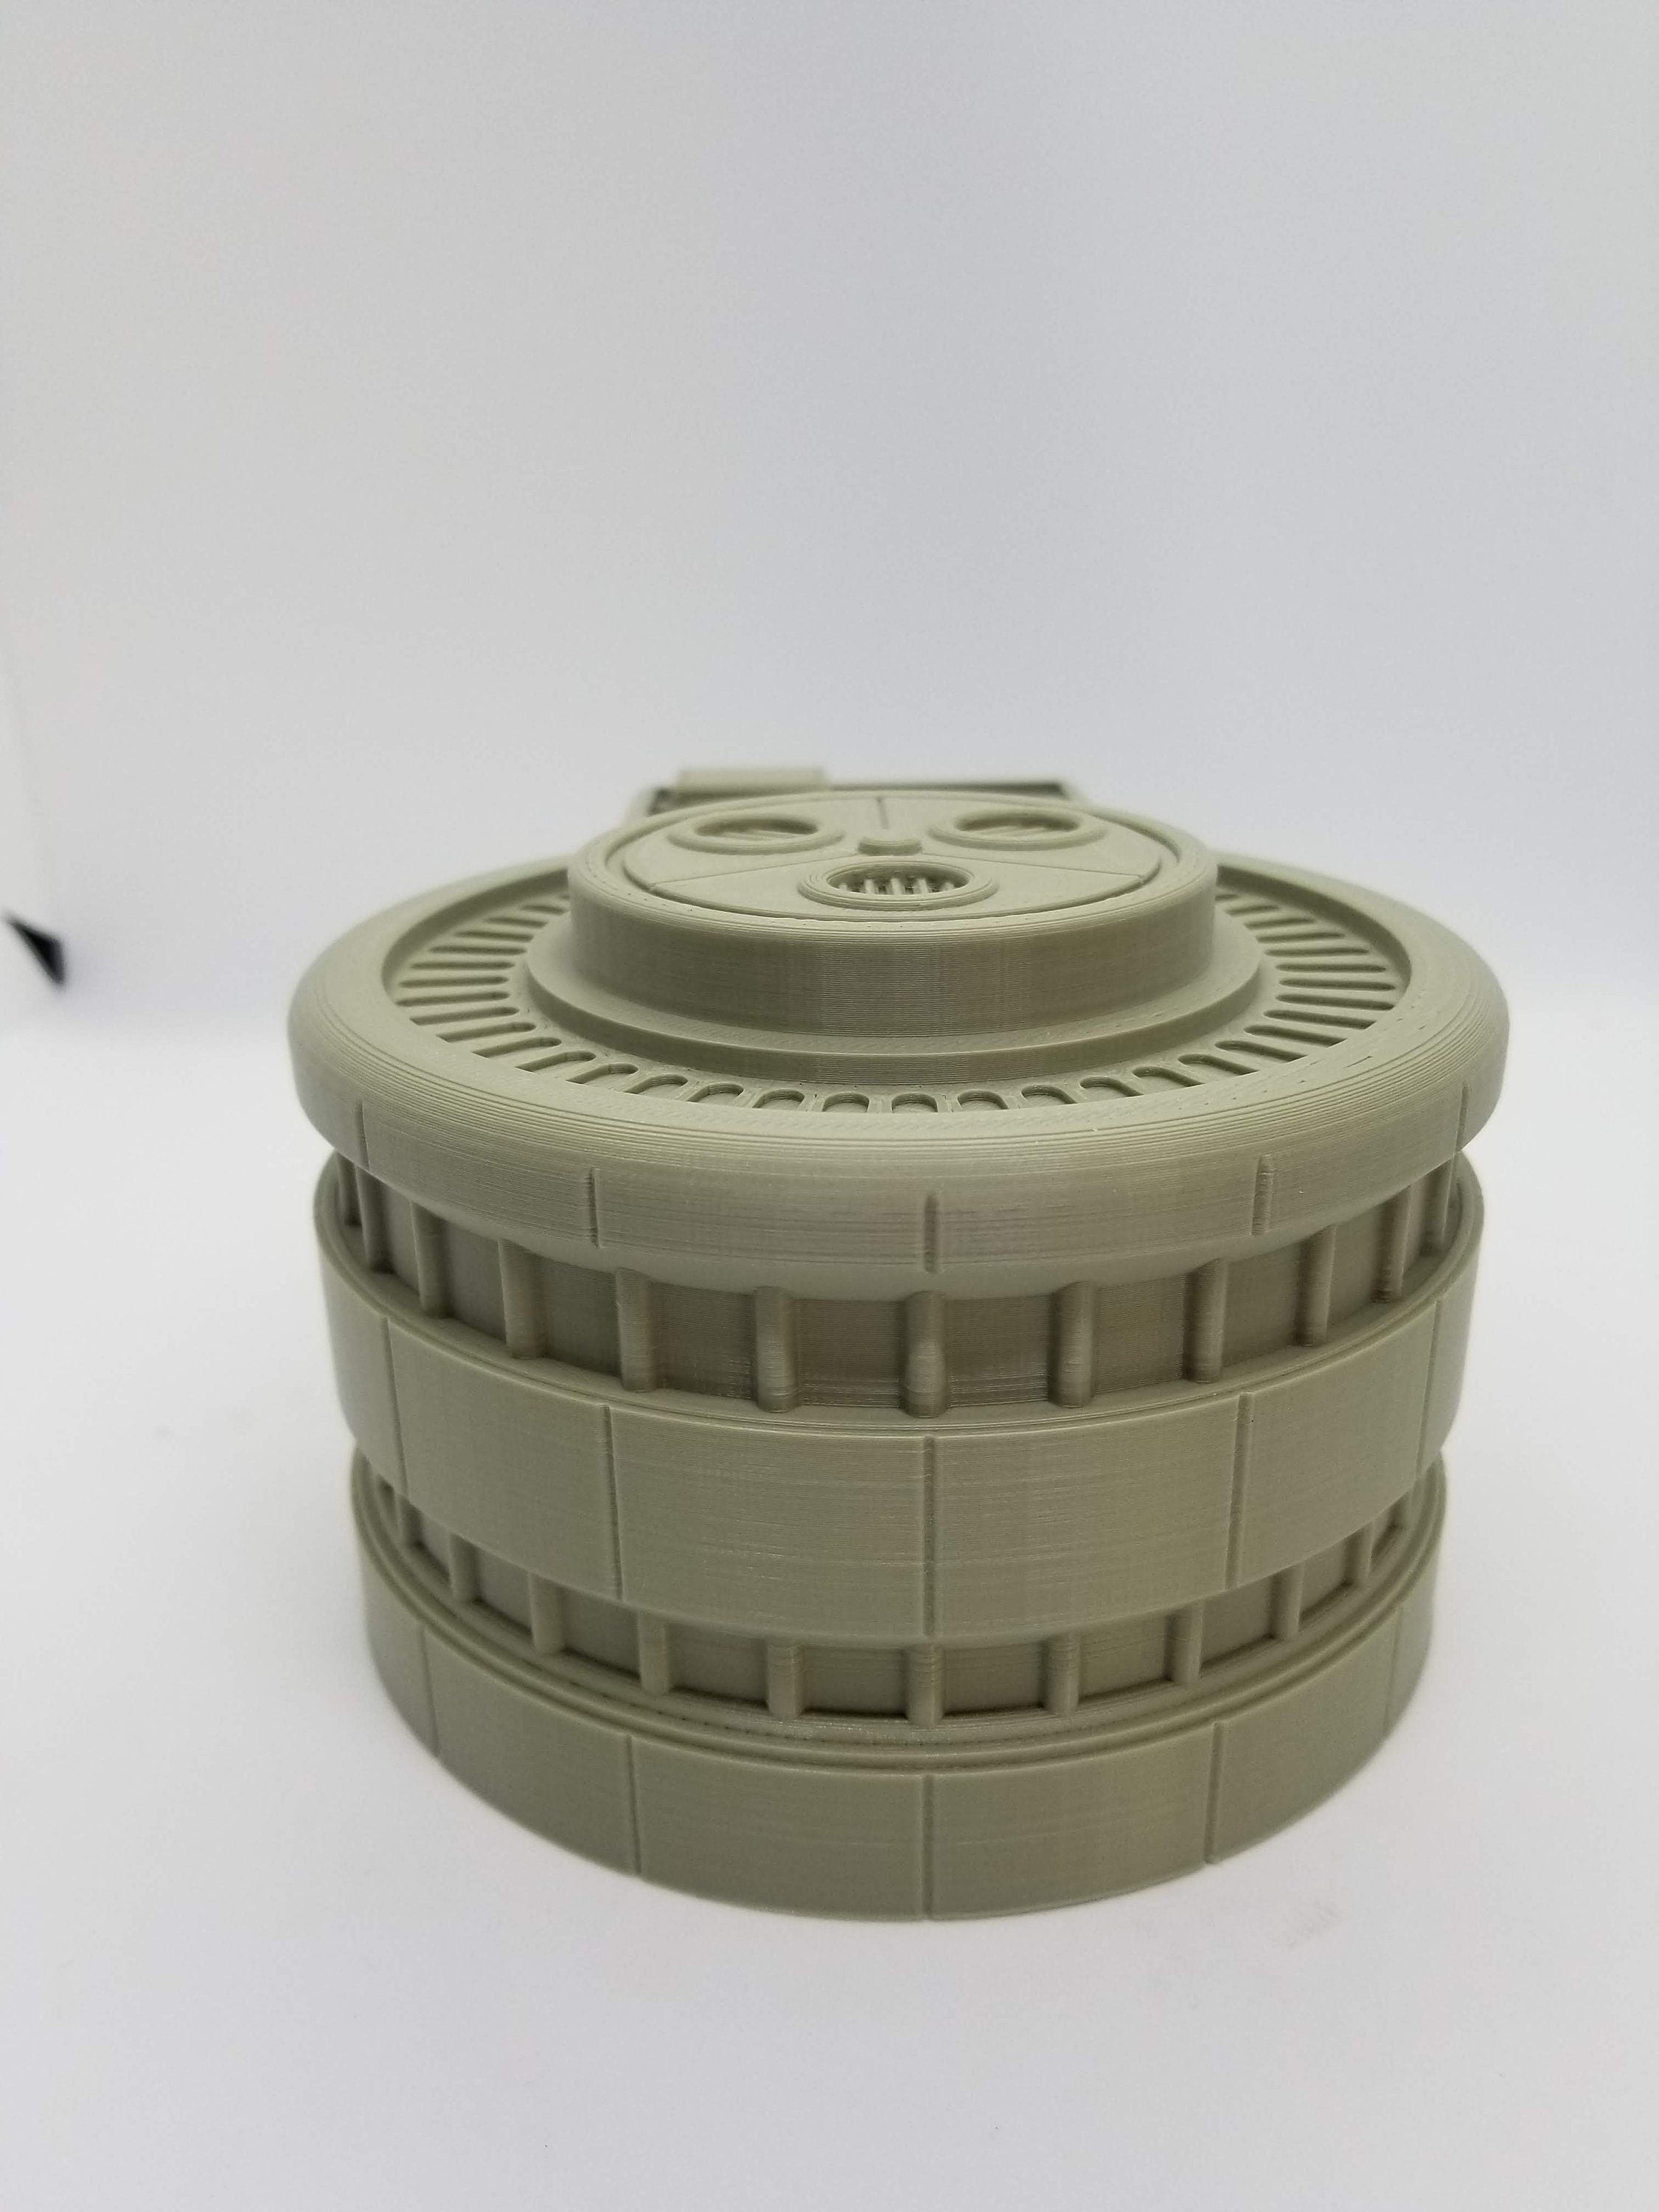 3d Printed Sci-Fi Cooling Unit / Imperial Terrain Licensed On-Line Printer / Print to Order